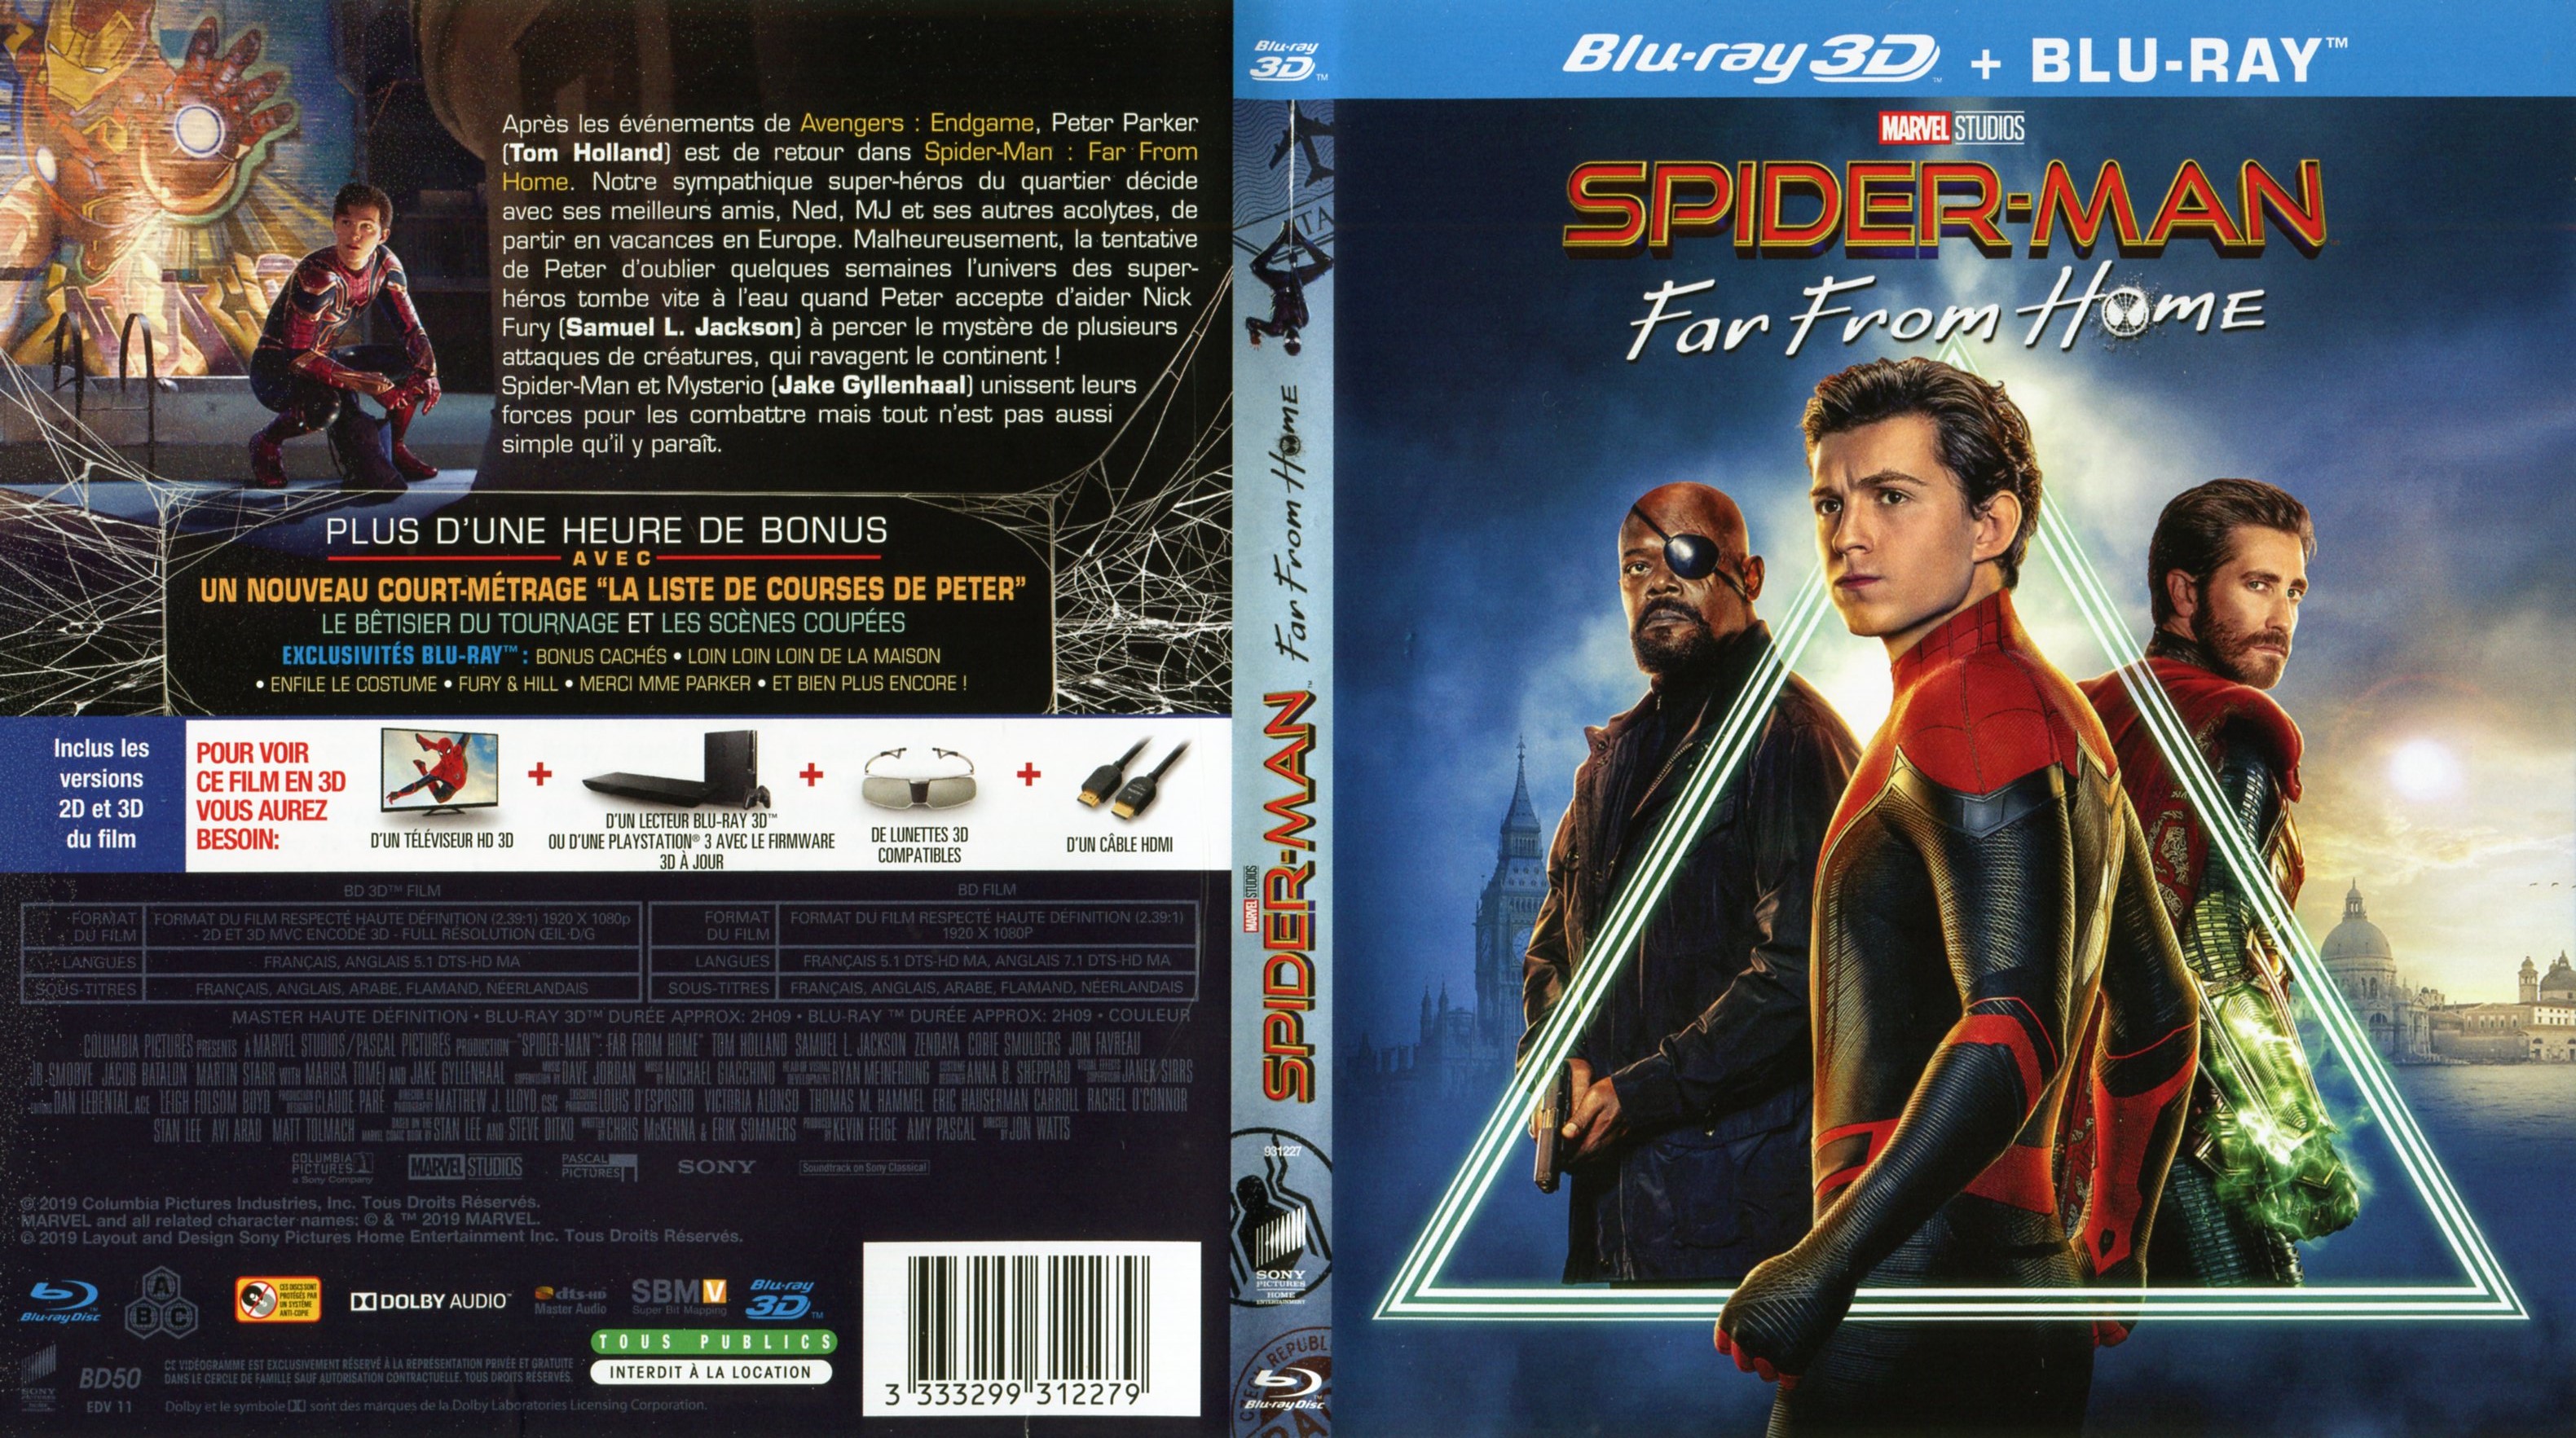 Jaquette DVD Spider-man Far from home 3D (BLU-RAY)